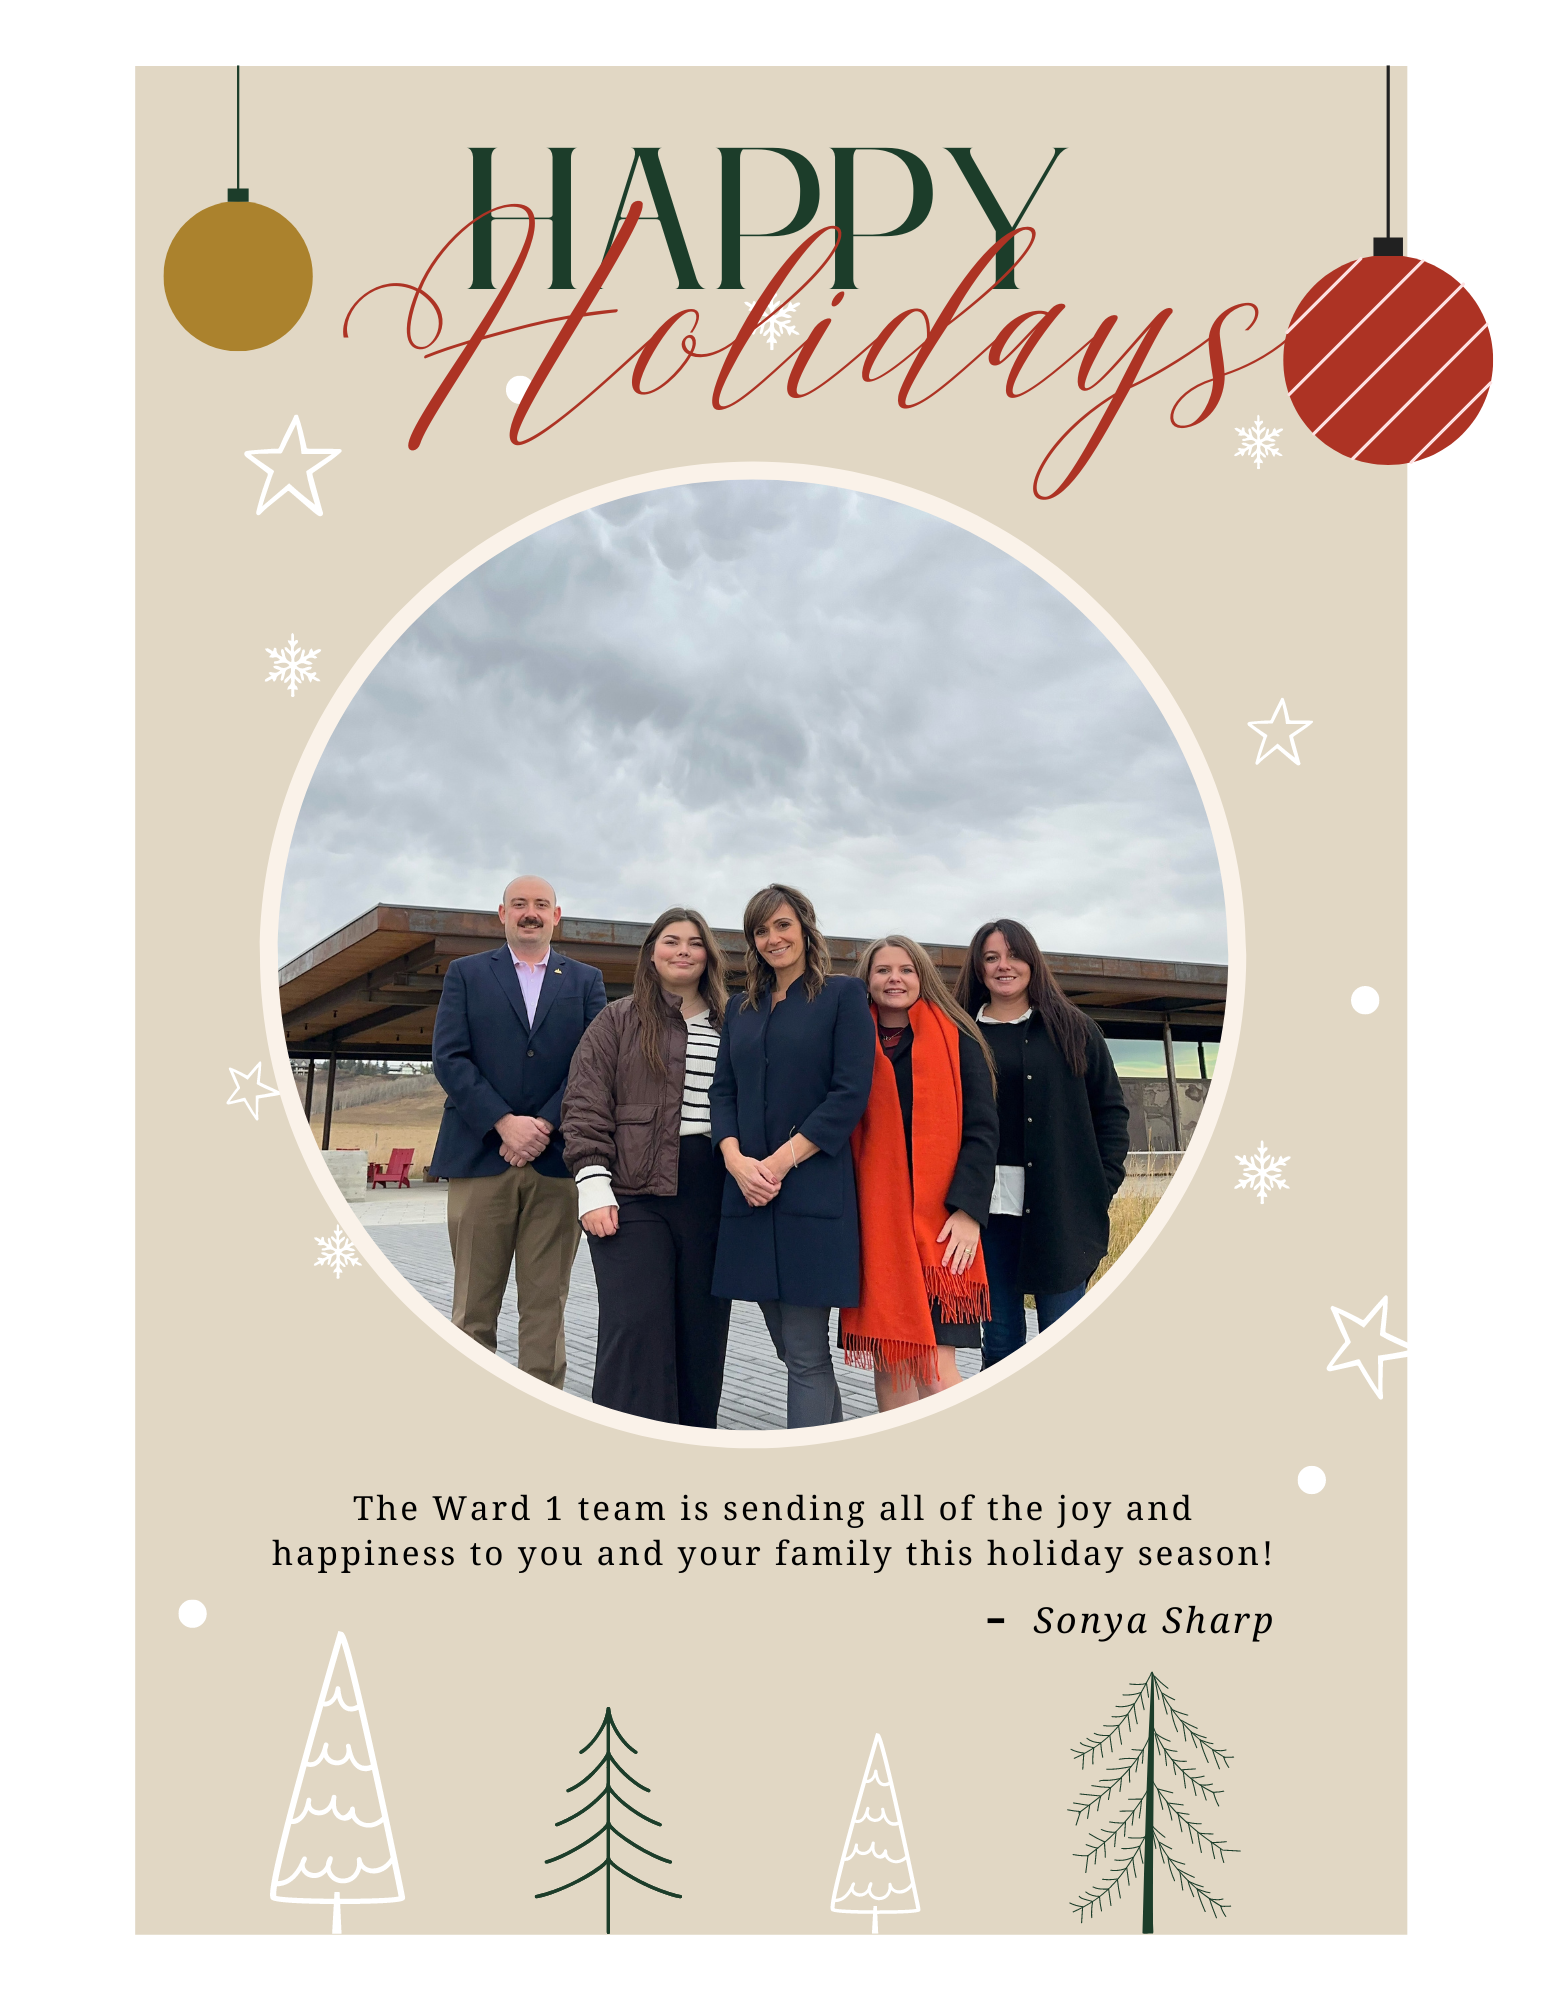 The Ward 1 team is sending all of the joy and happiness to you and your family this holiday season! - Sonya Sharp